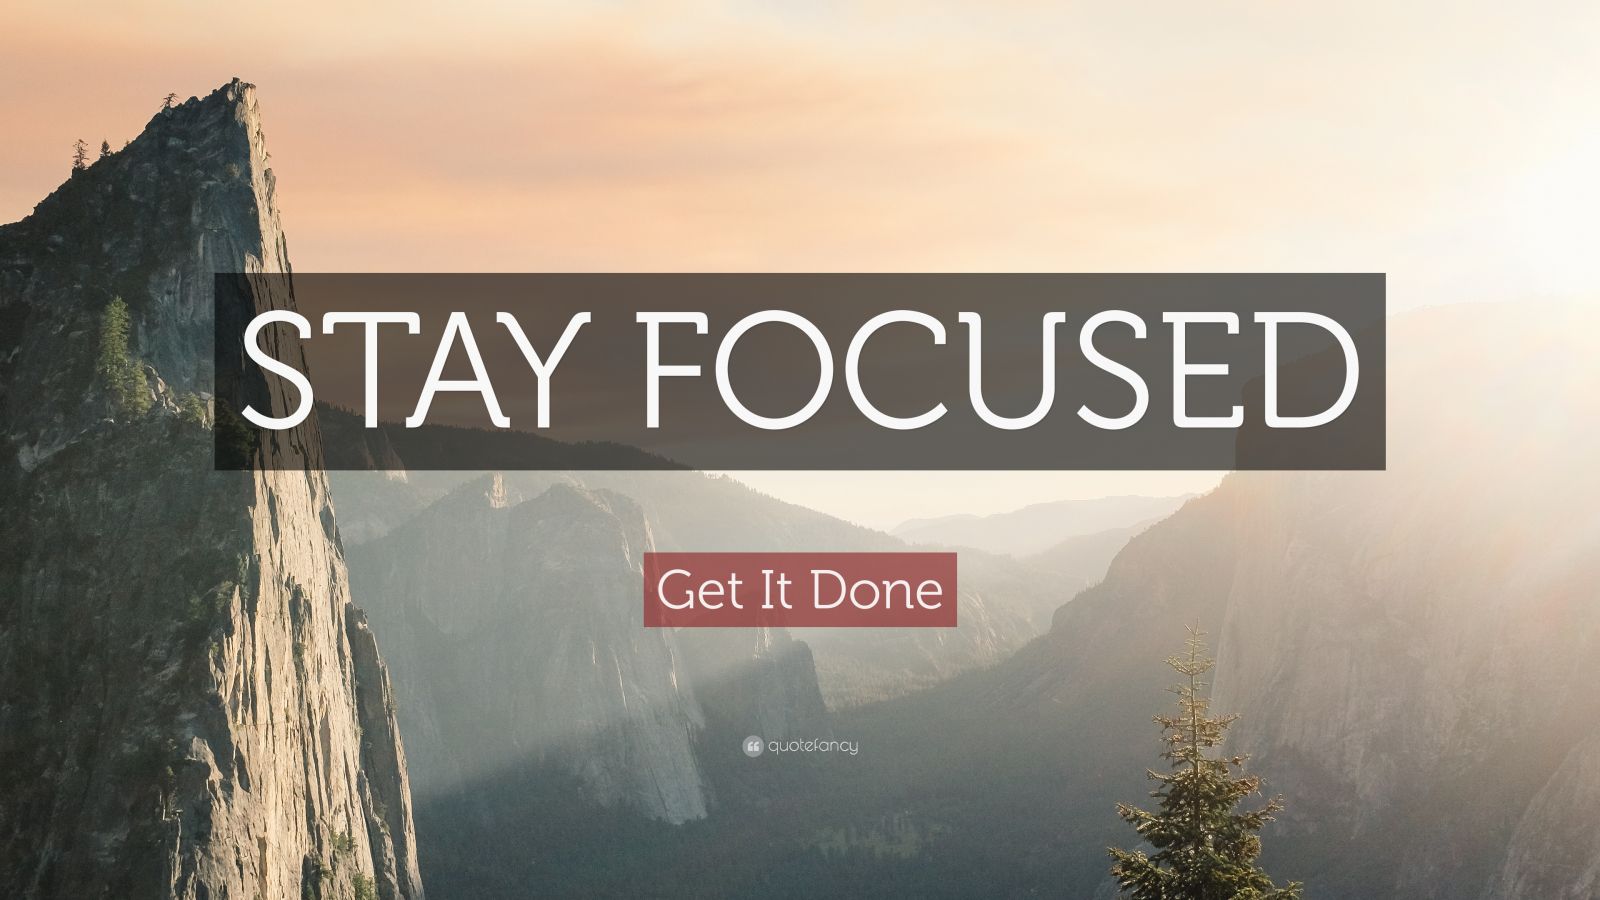 Get It Done Quote: “STAY FOCUSED” (20 wallpapers) - Quotefancy